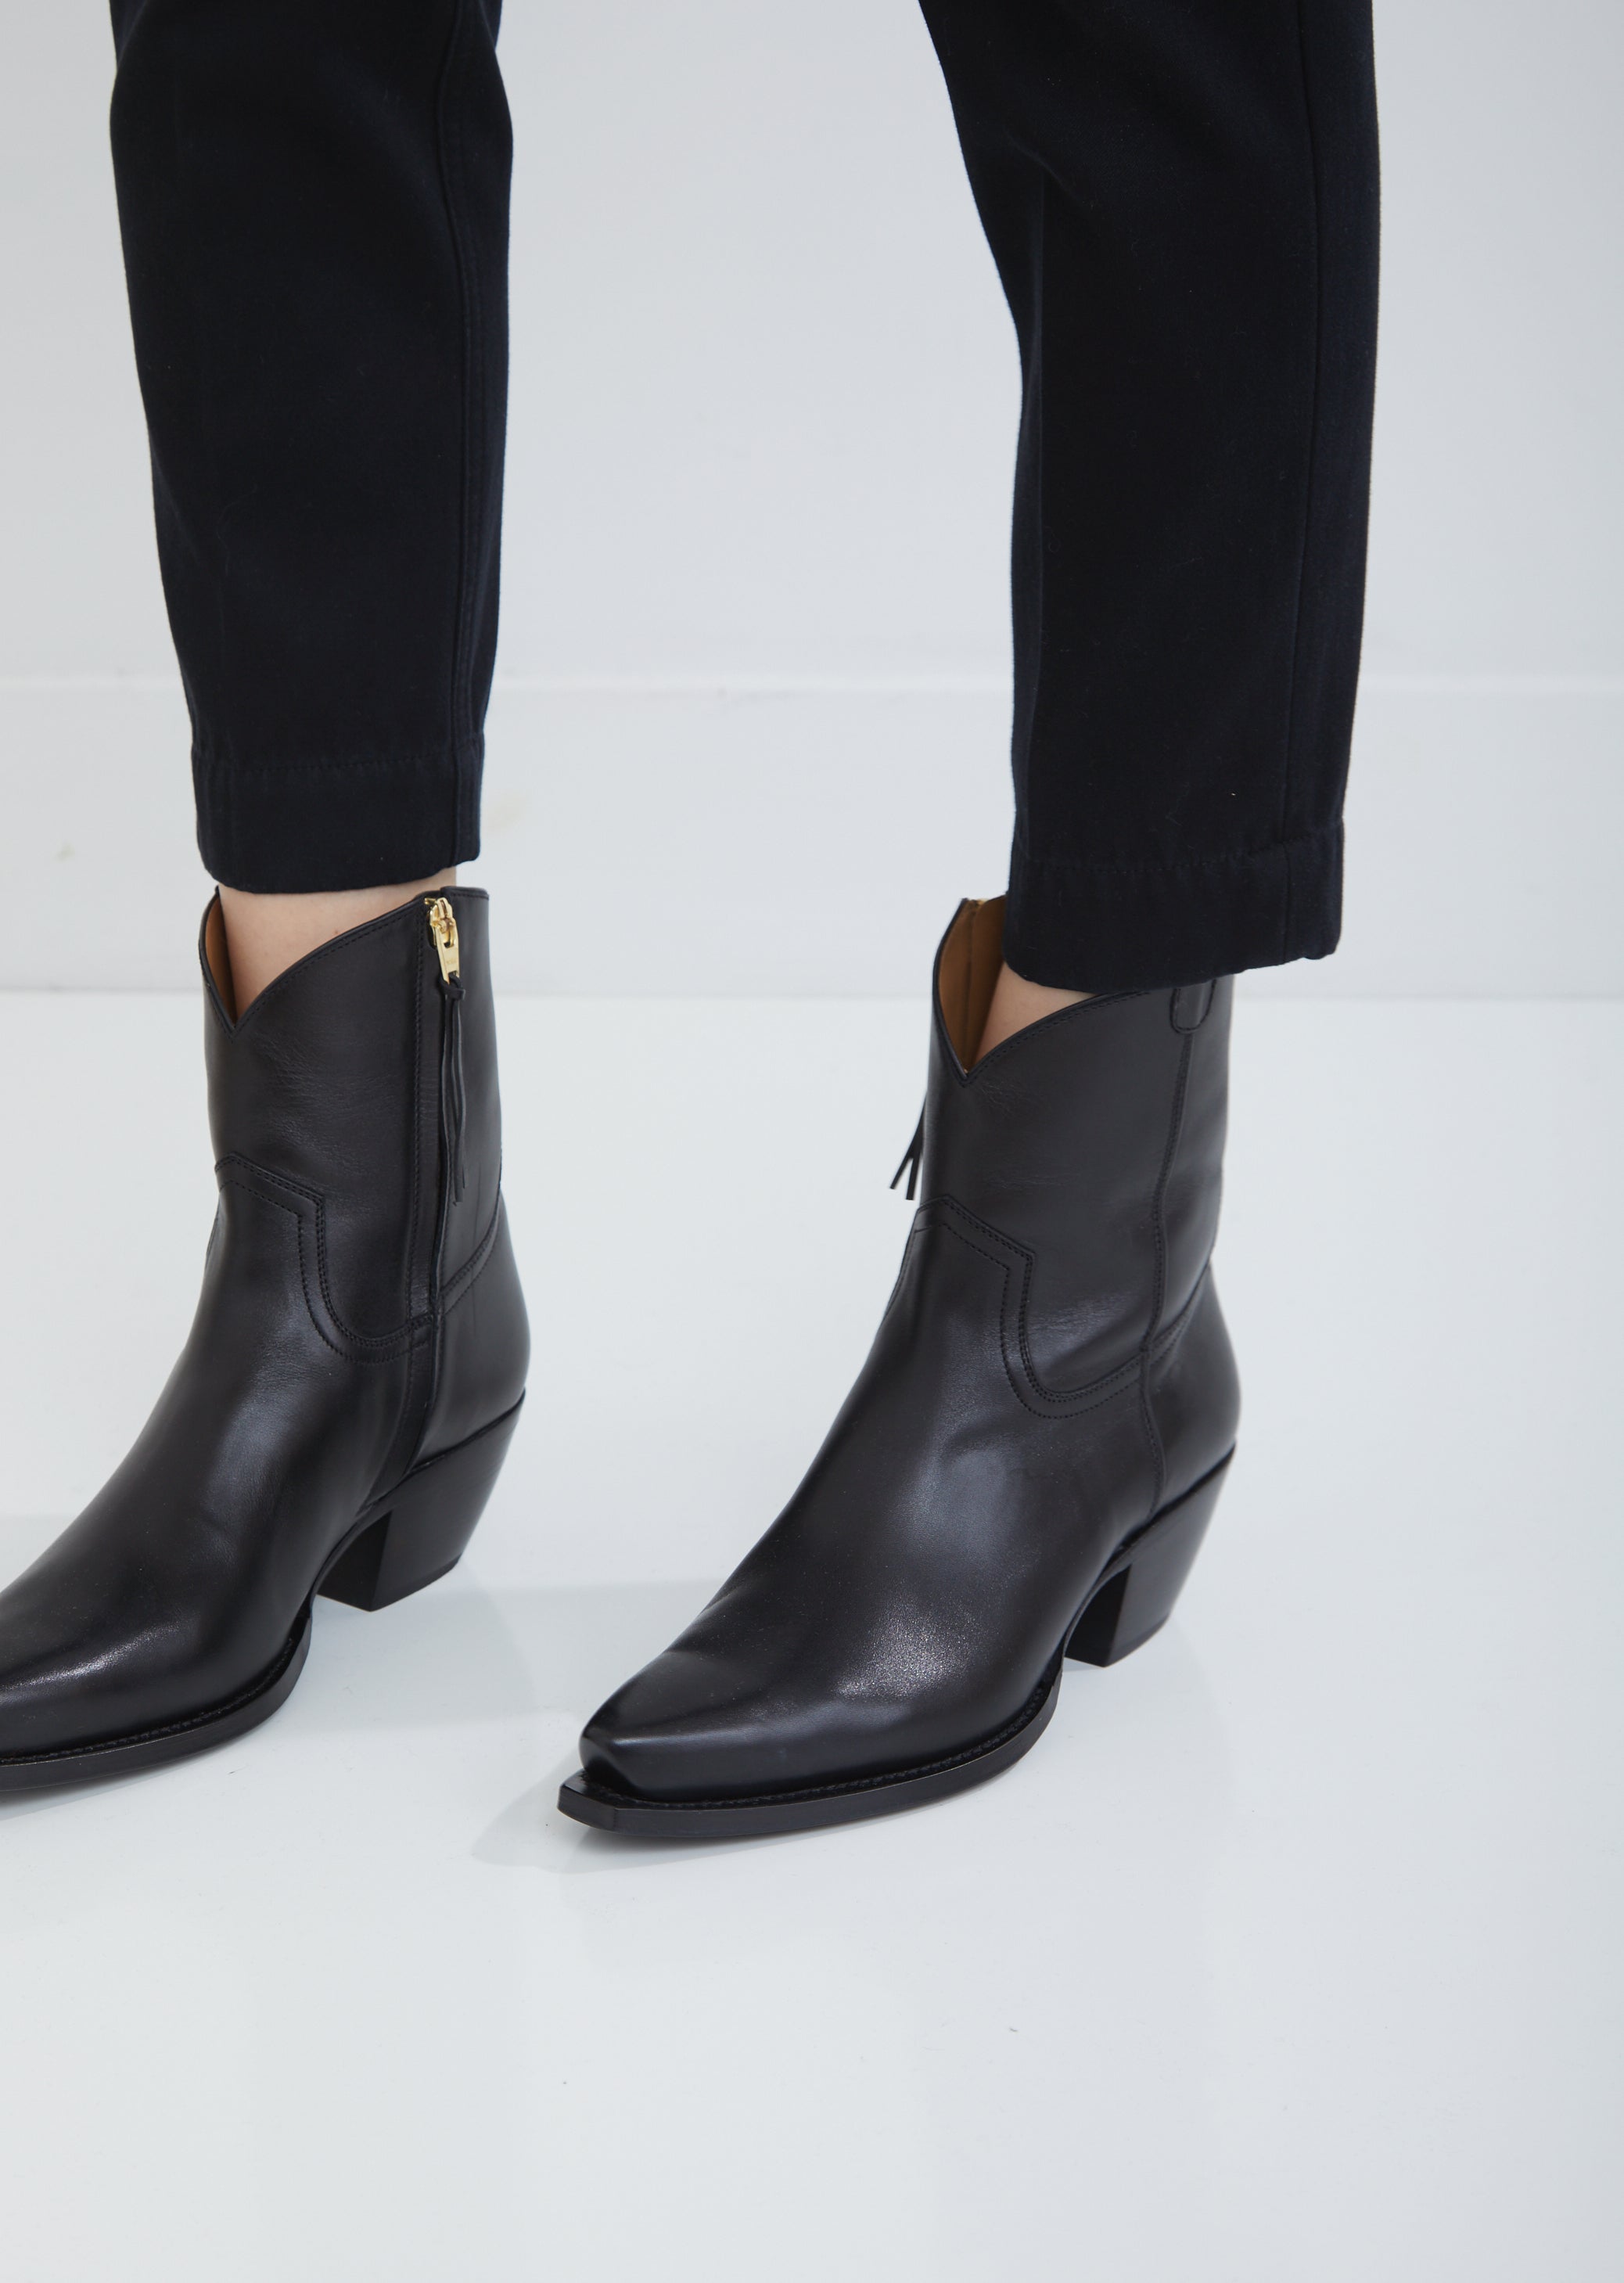 LOUİS VUİTTON MATCHMAKE LOW ANKLE BOOTS